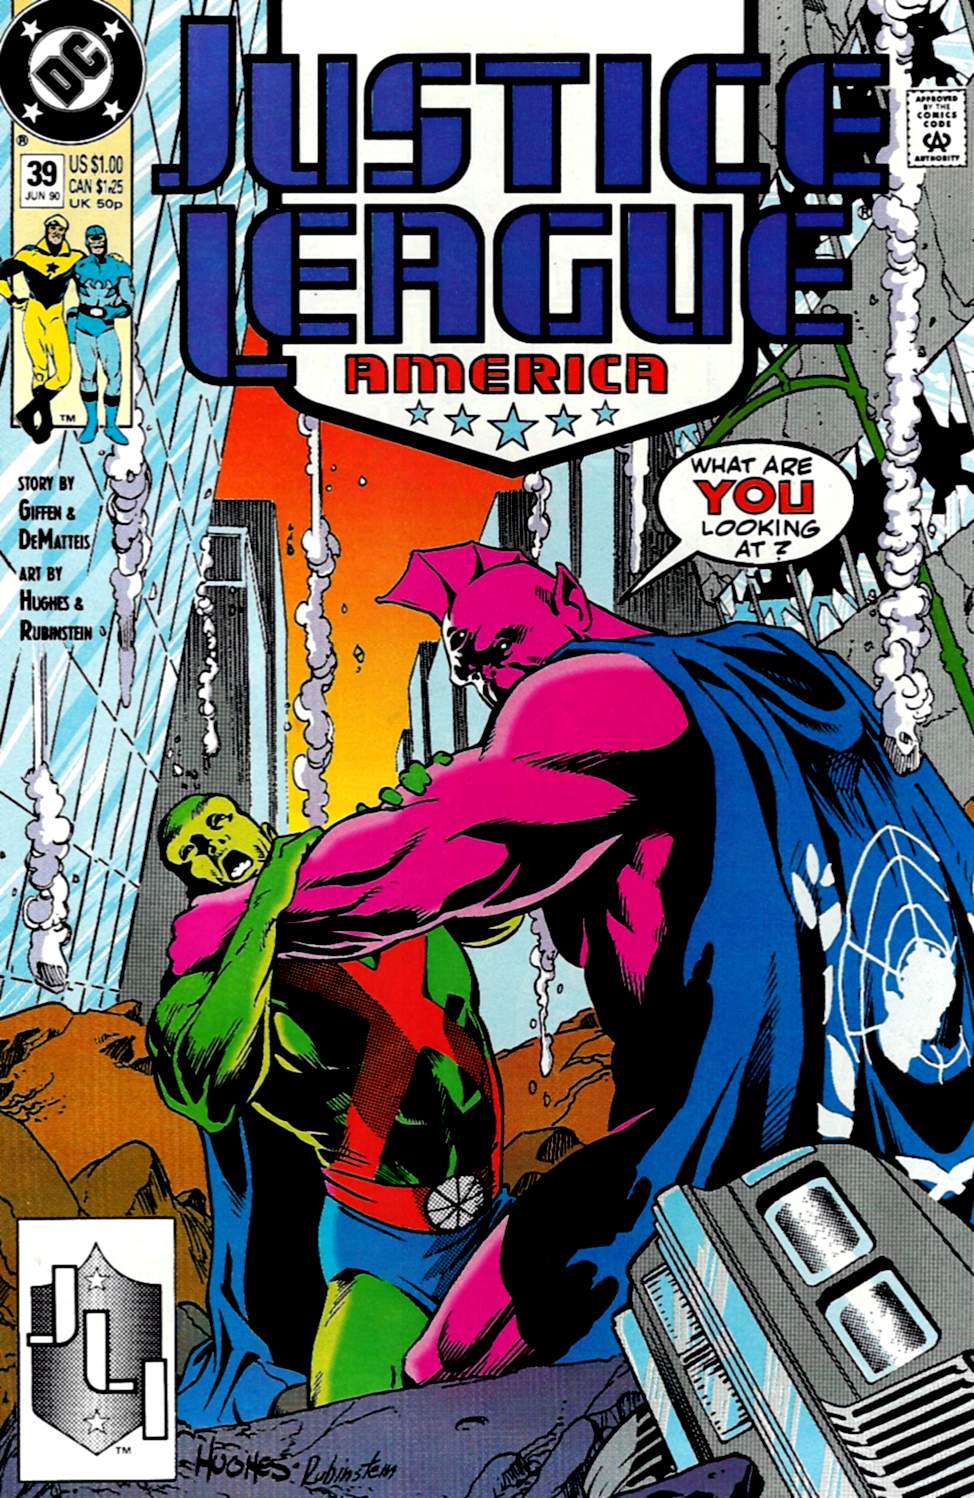 Read online Justice League America comic -  Issue #39 - 1